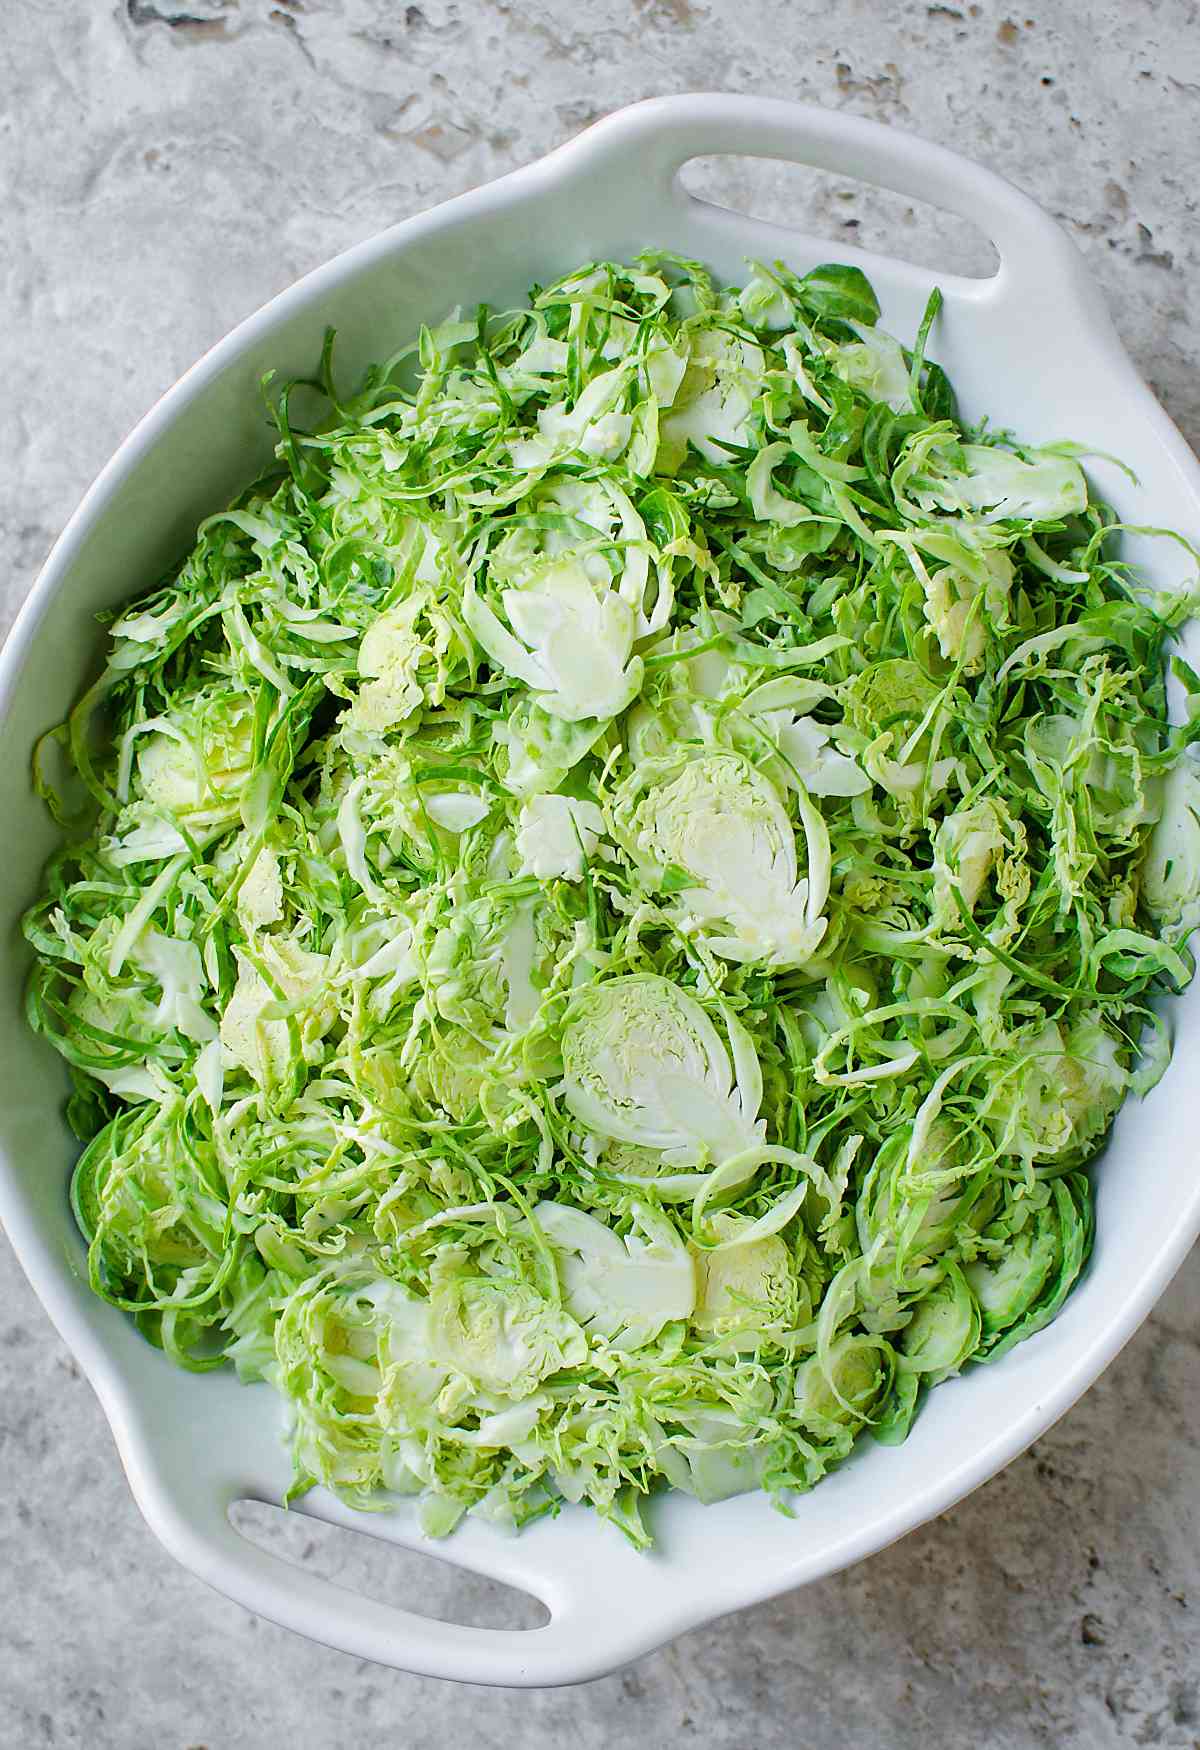 Shredded brussels sprouts in a bowl.